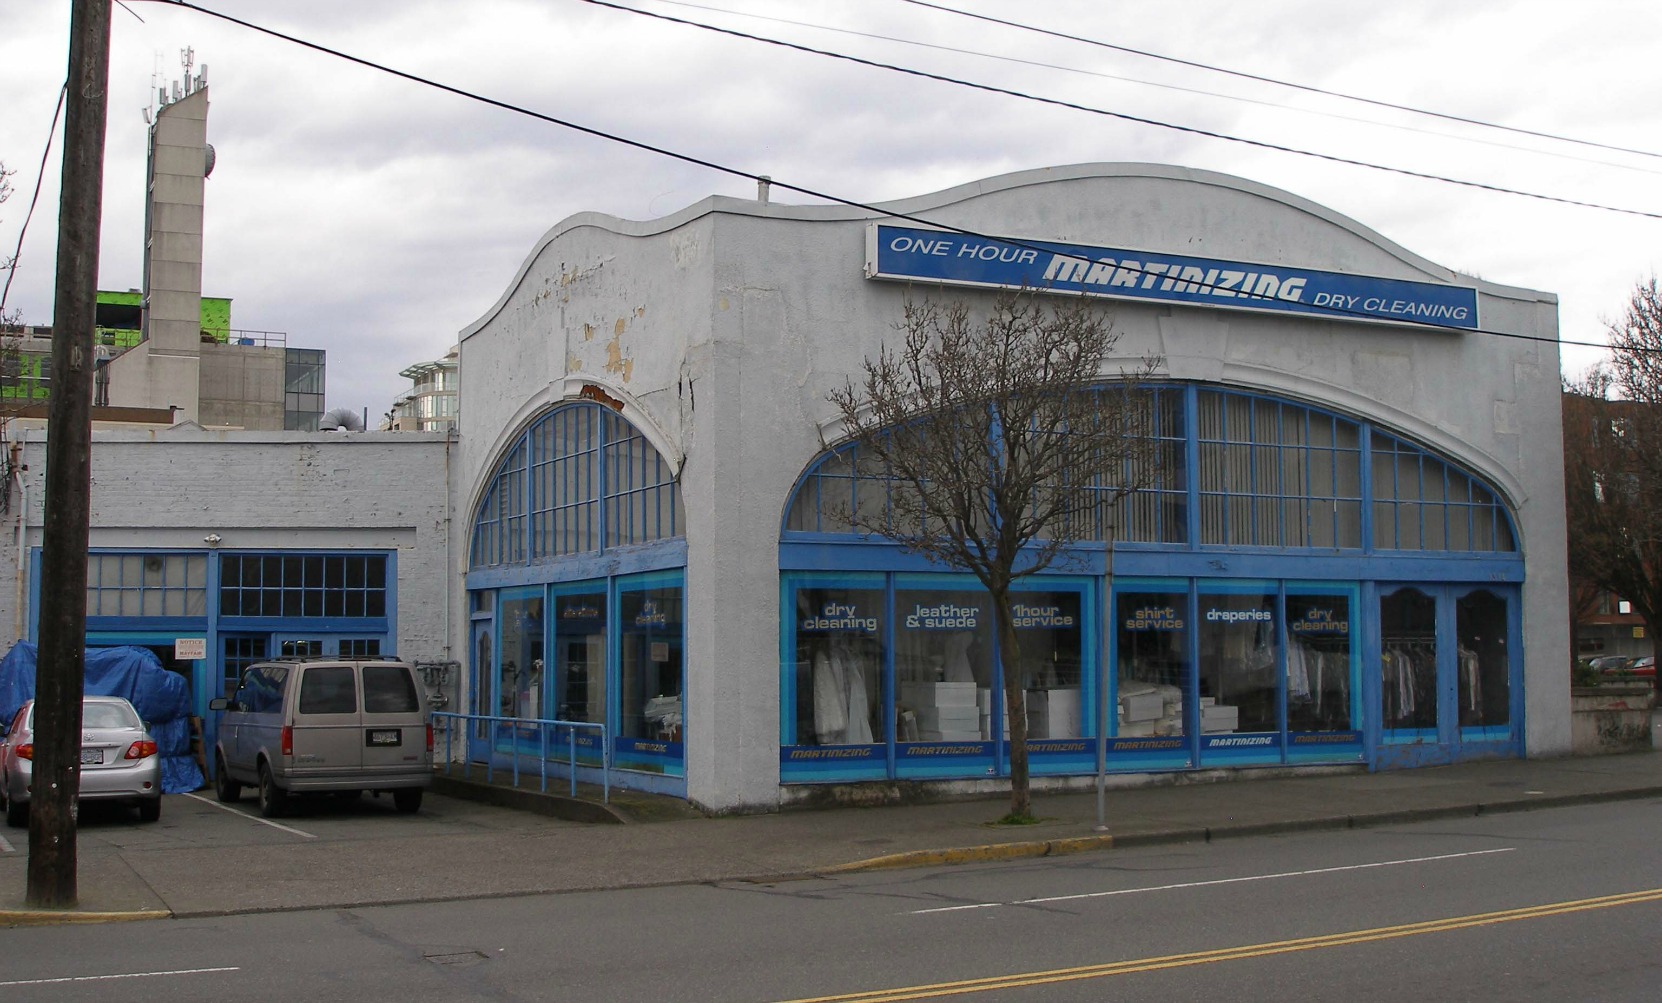 1314 Quadra Street in 2010 (photo by Victoria Online Sightseeing Tours)